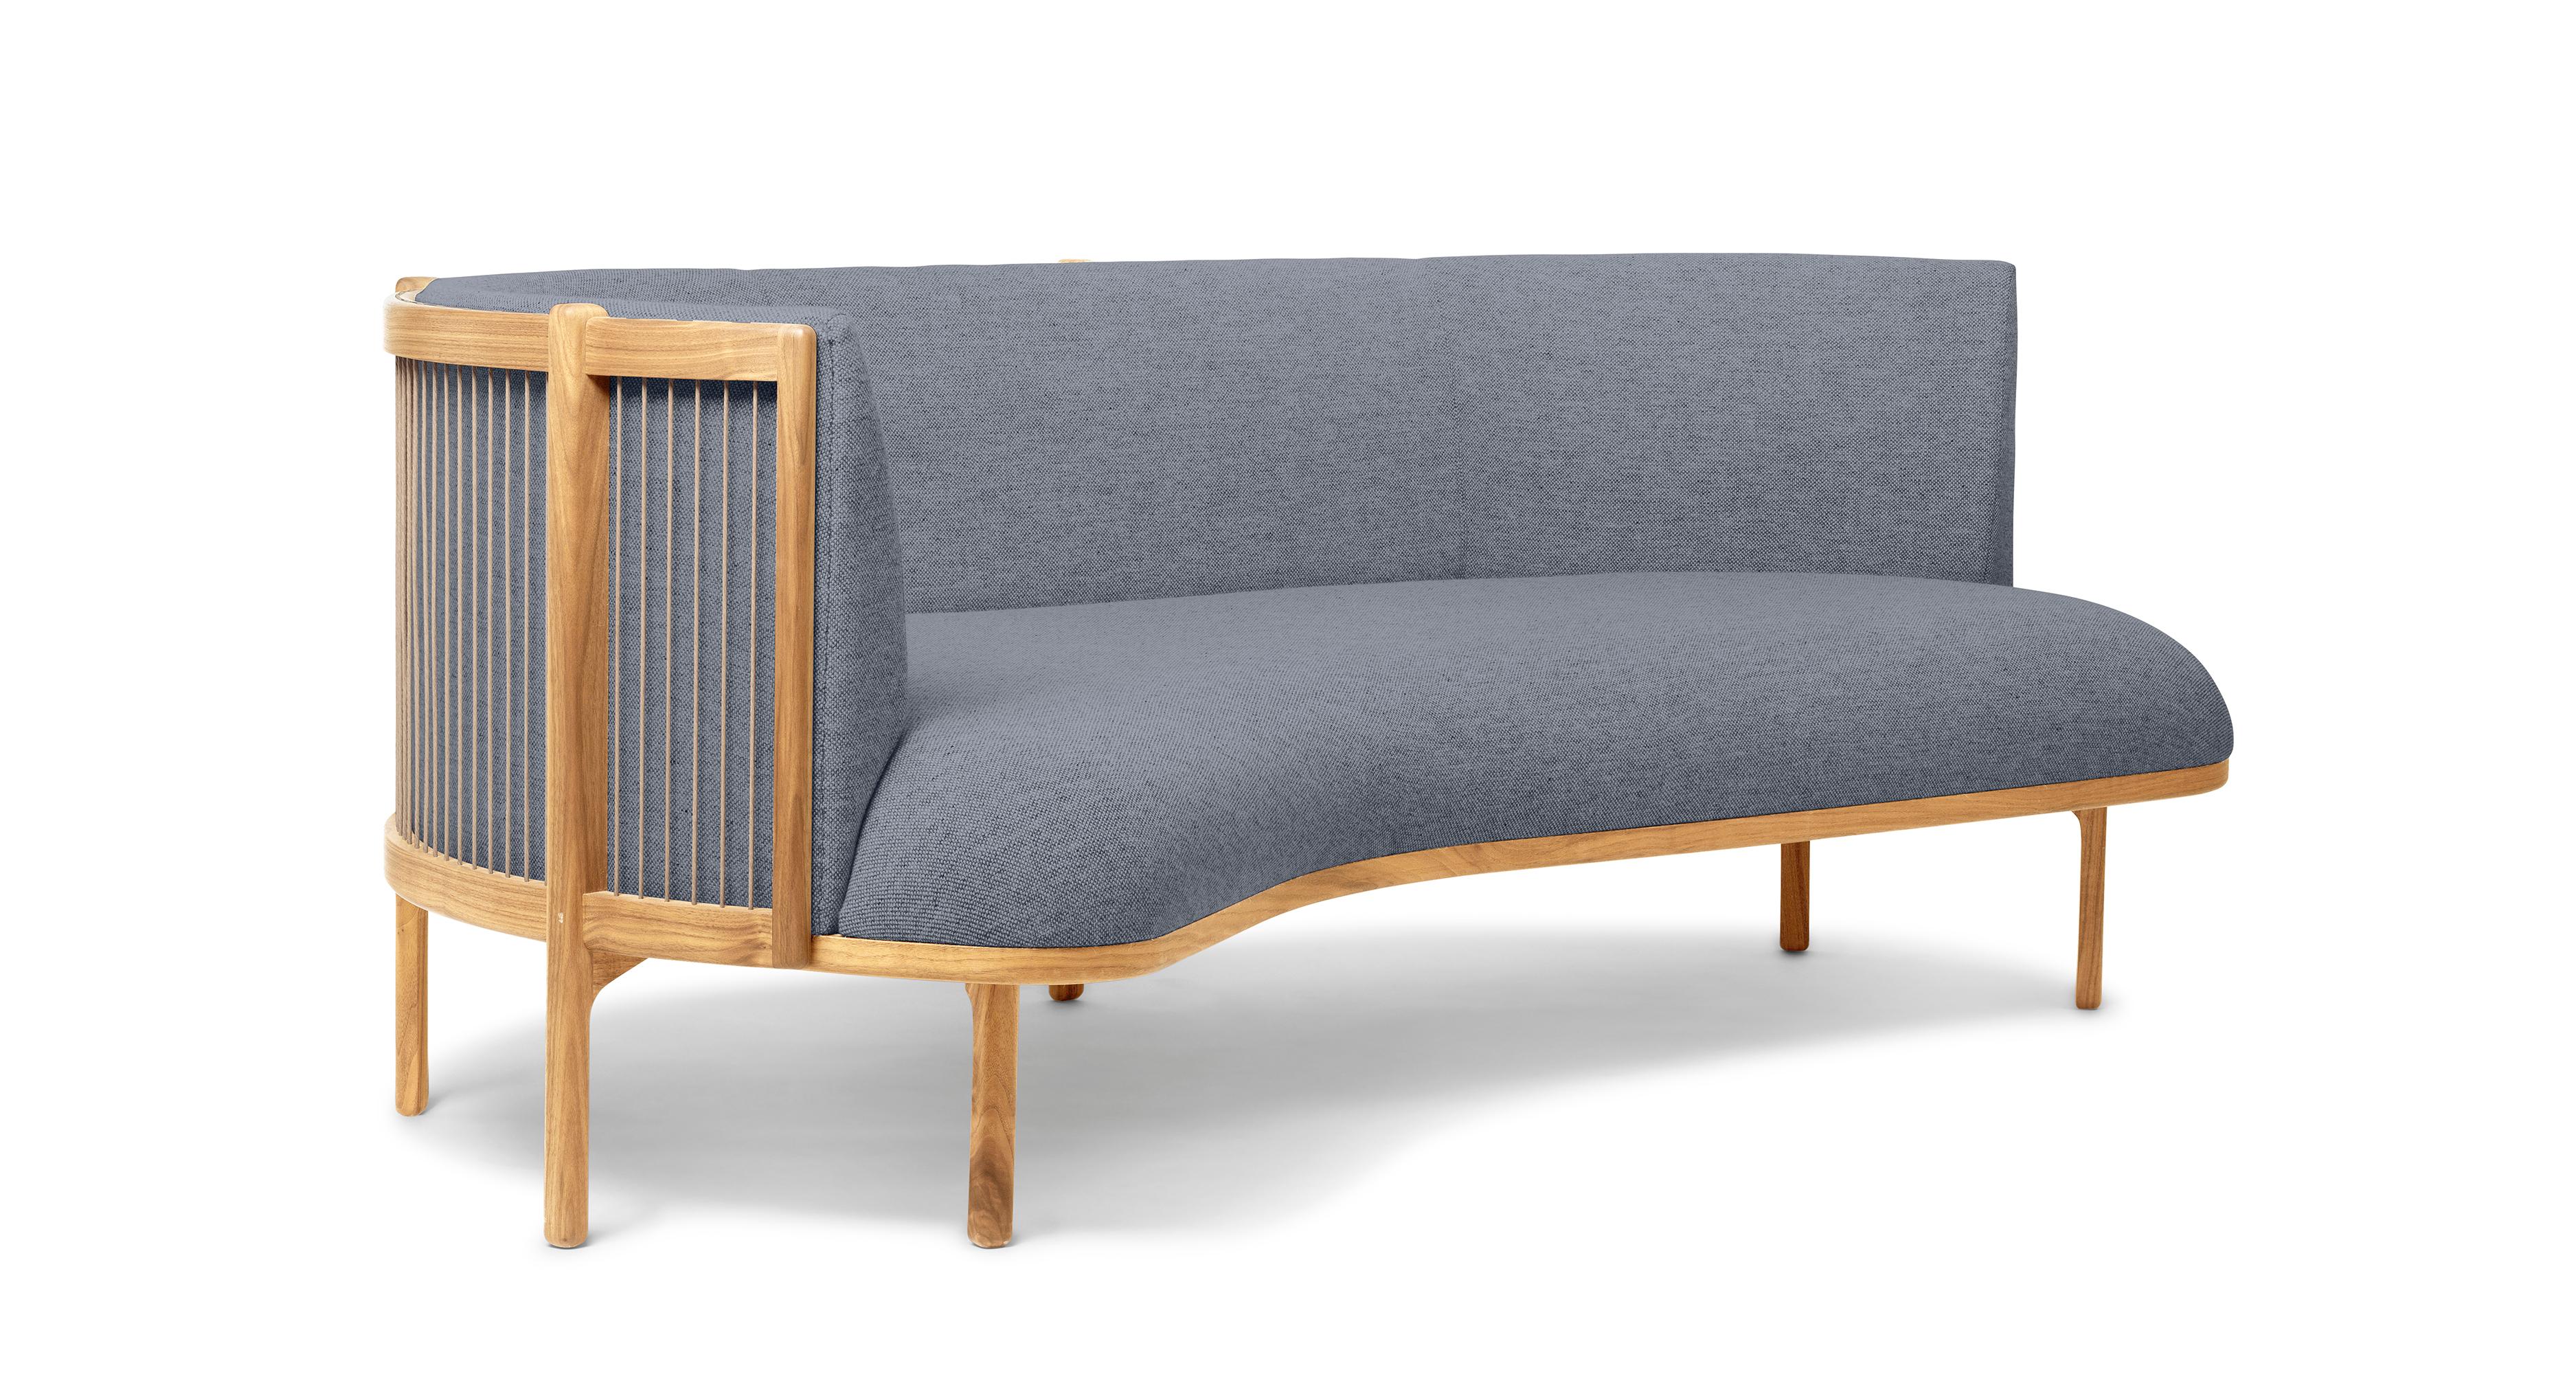 The Sideways sofa from Rikke Frost combines classic materials – wood, paper cord, and high-quality upholstery textile – with a modern asymmetric shape. The steam-bent backrest is shaped from solid wood and woven paper cord for a light, elegant